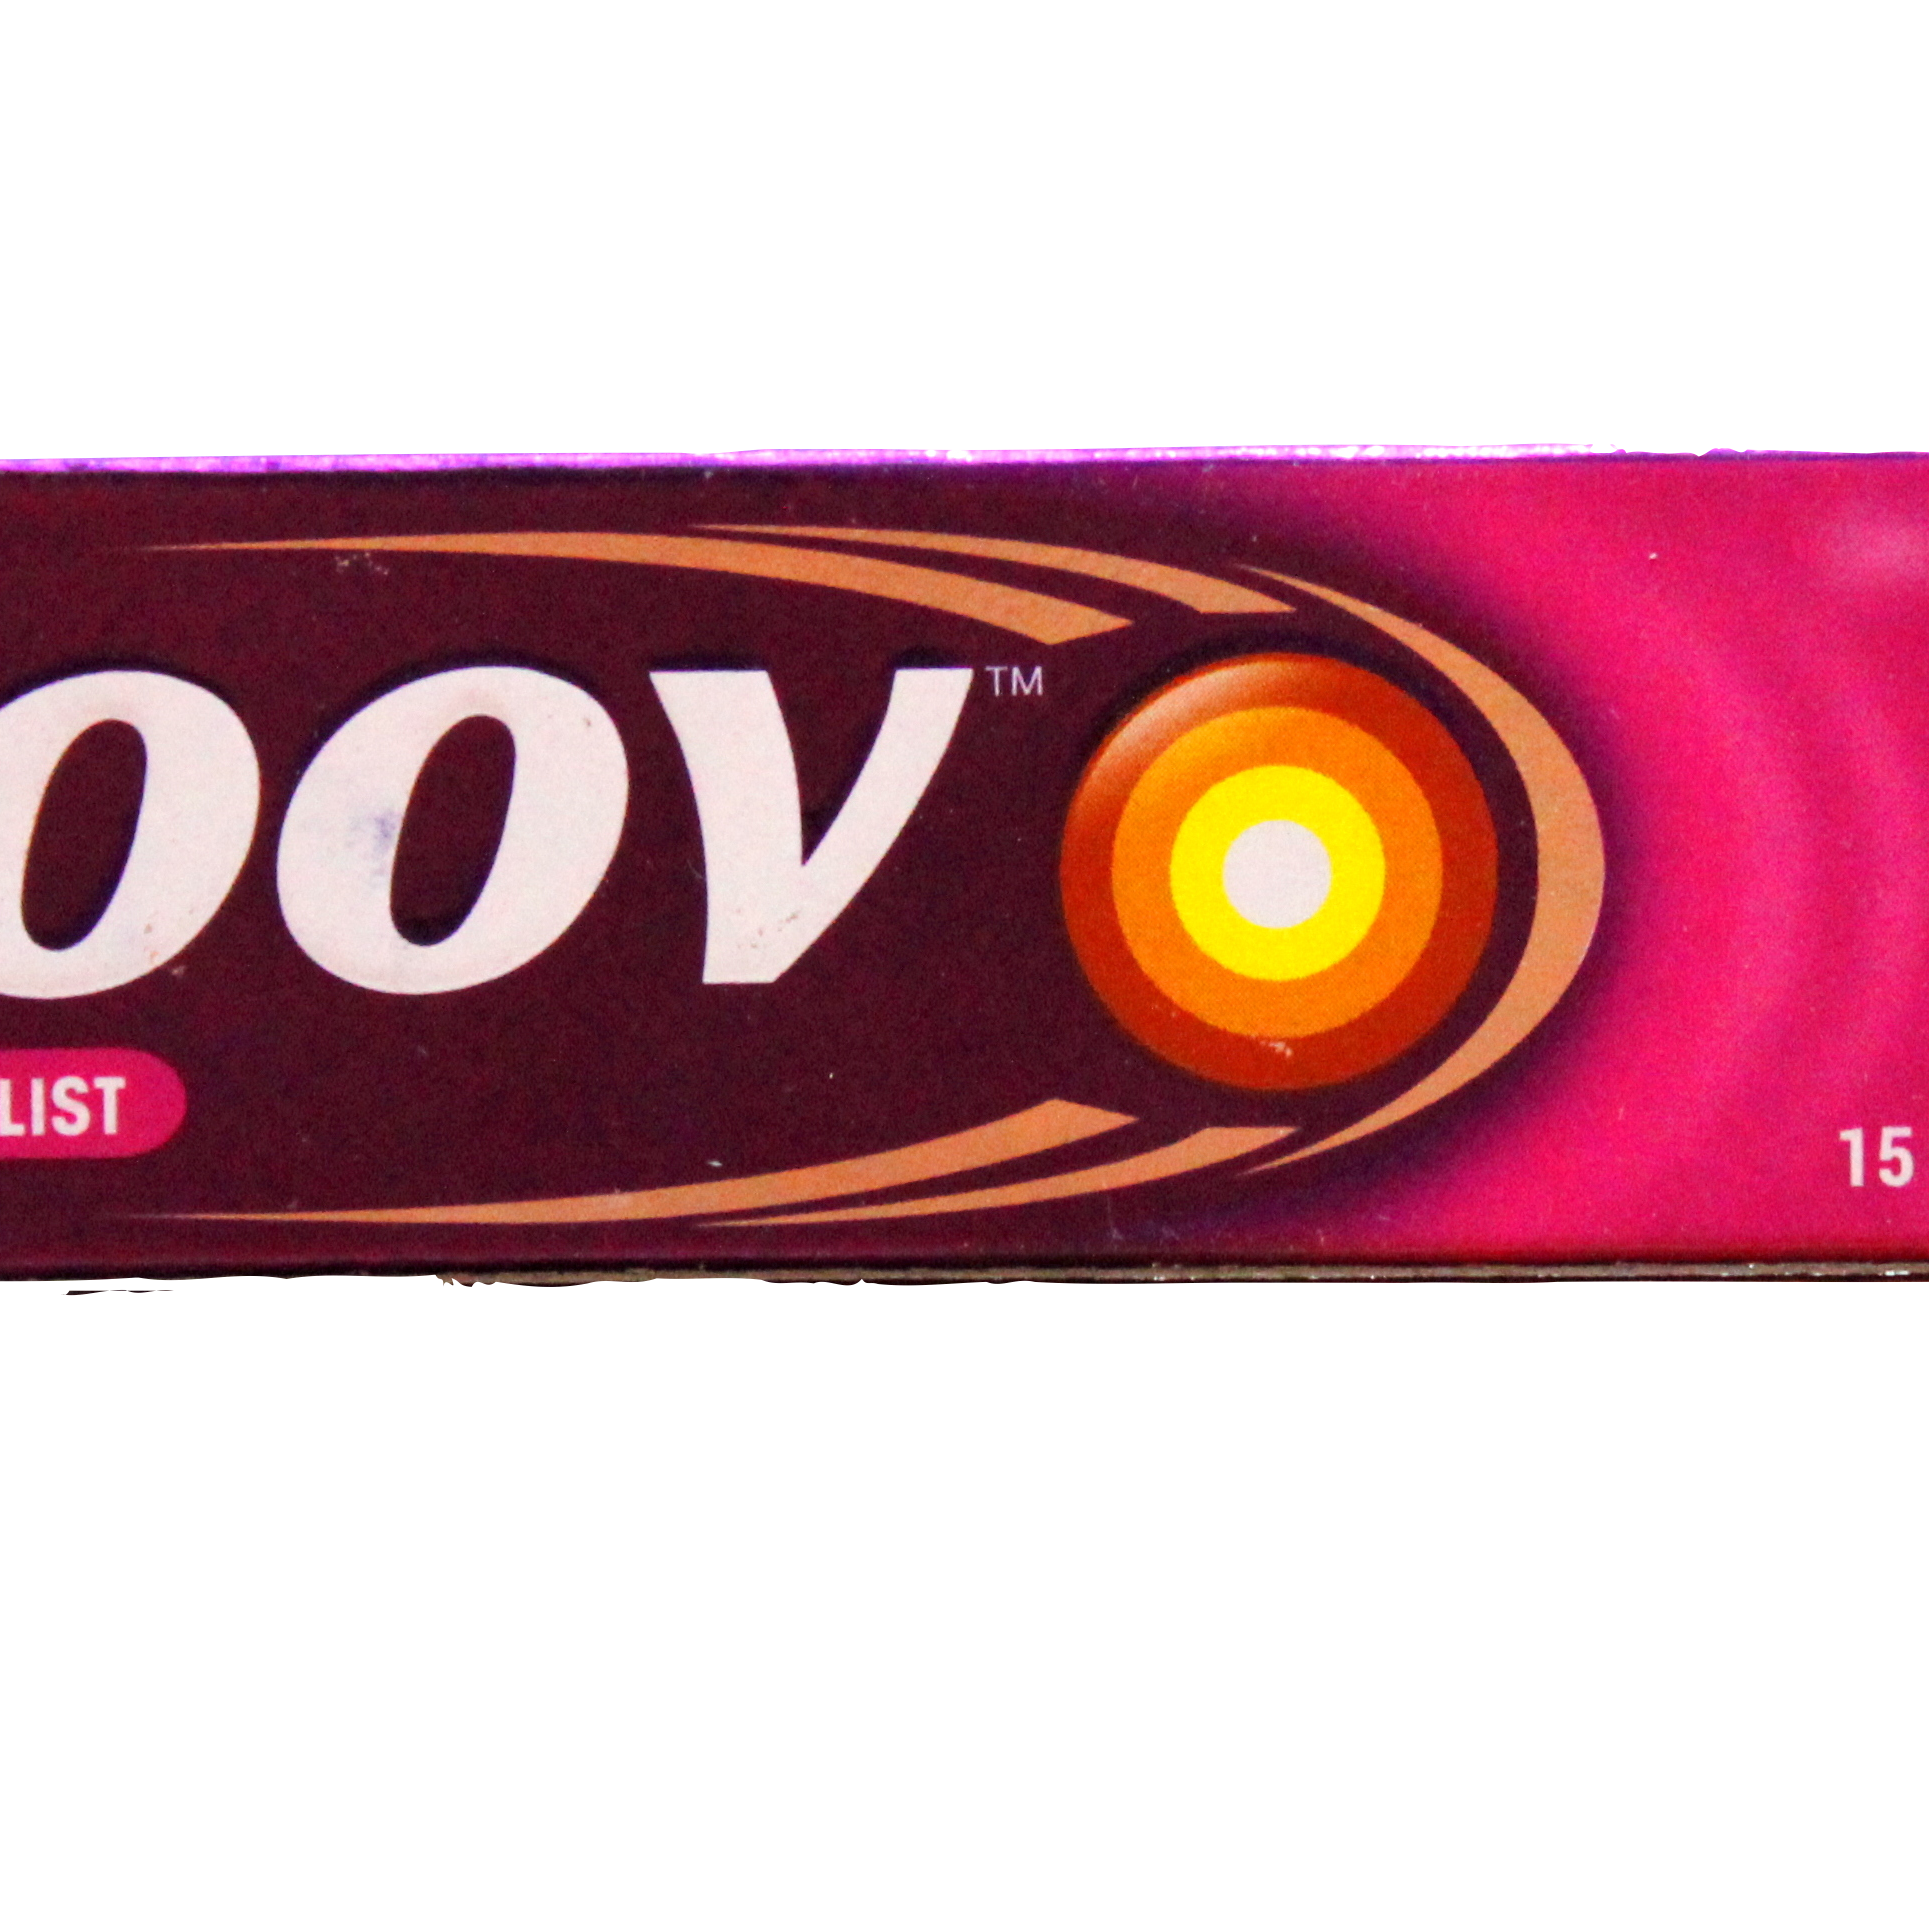 Shop Moov ointment 15gm at price 65.00 from Reckitt Online - Ayush Care